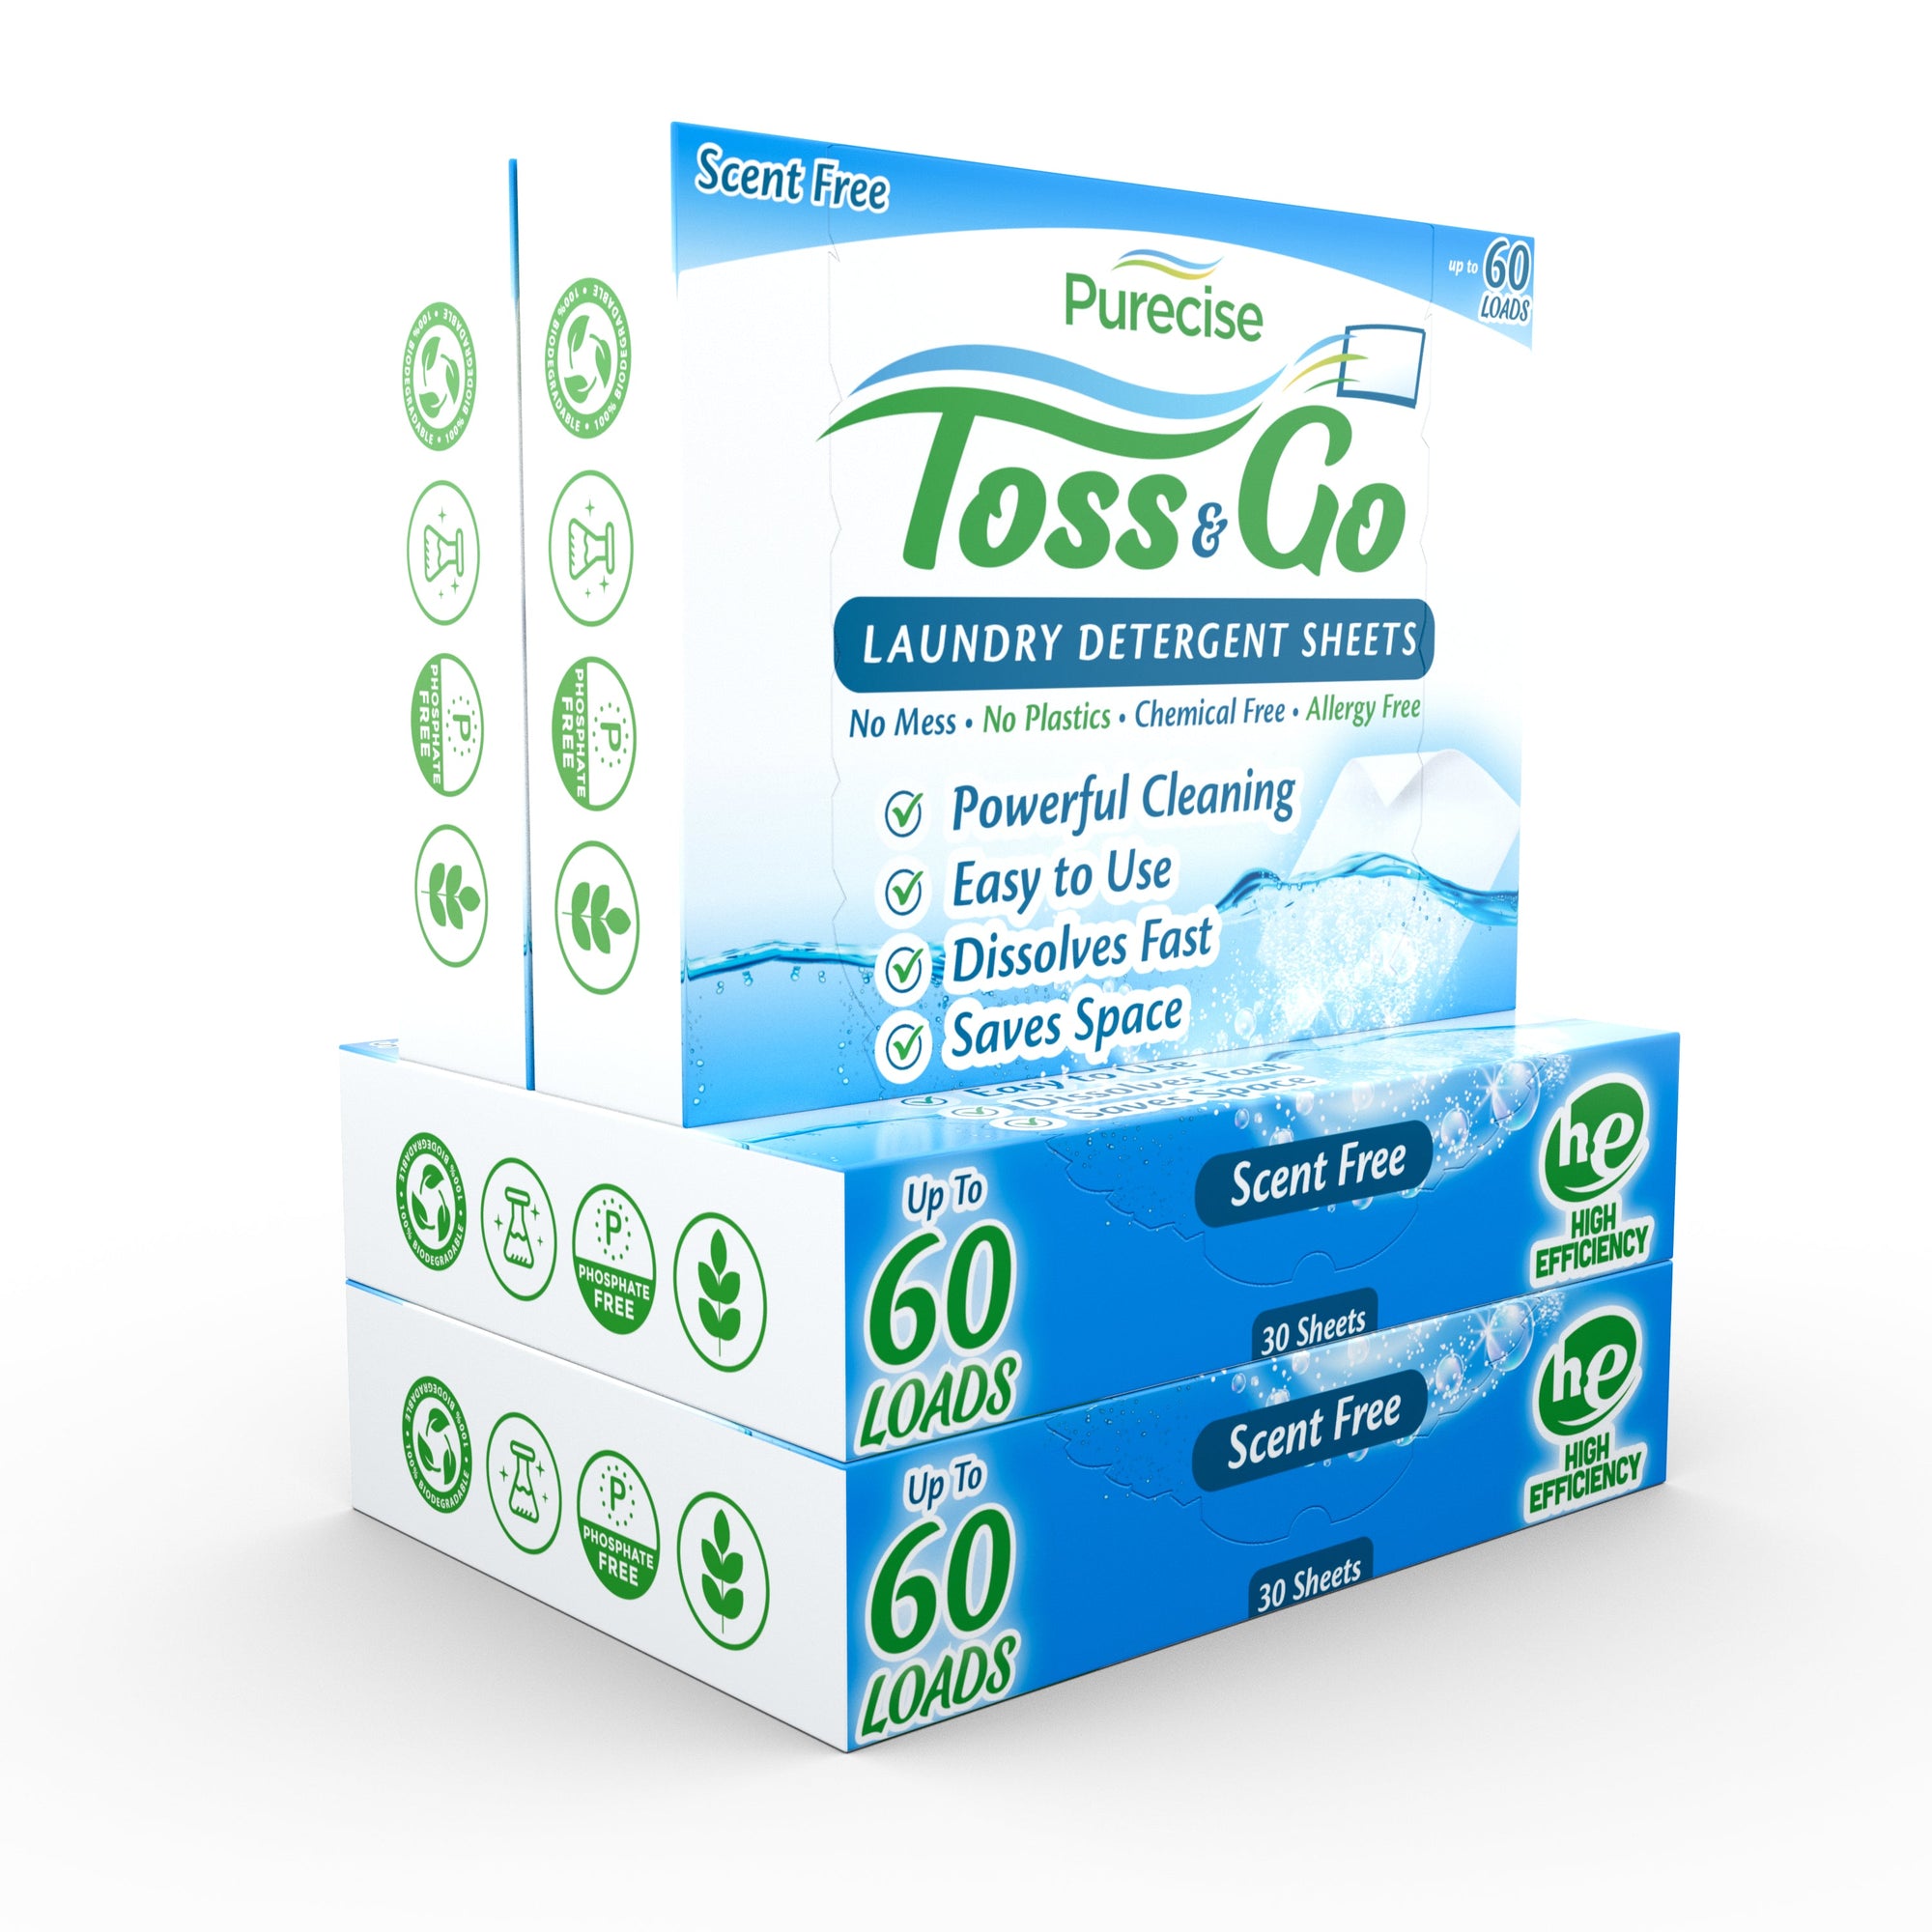 Toss & Go Laundry Detergent Sheets by Purecise